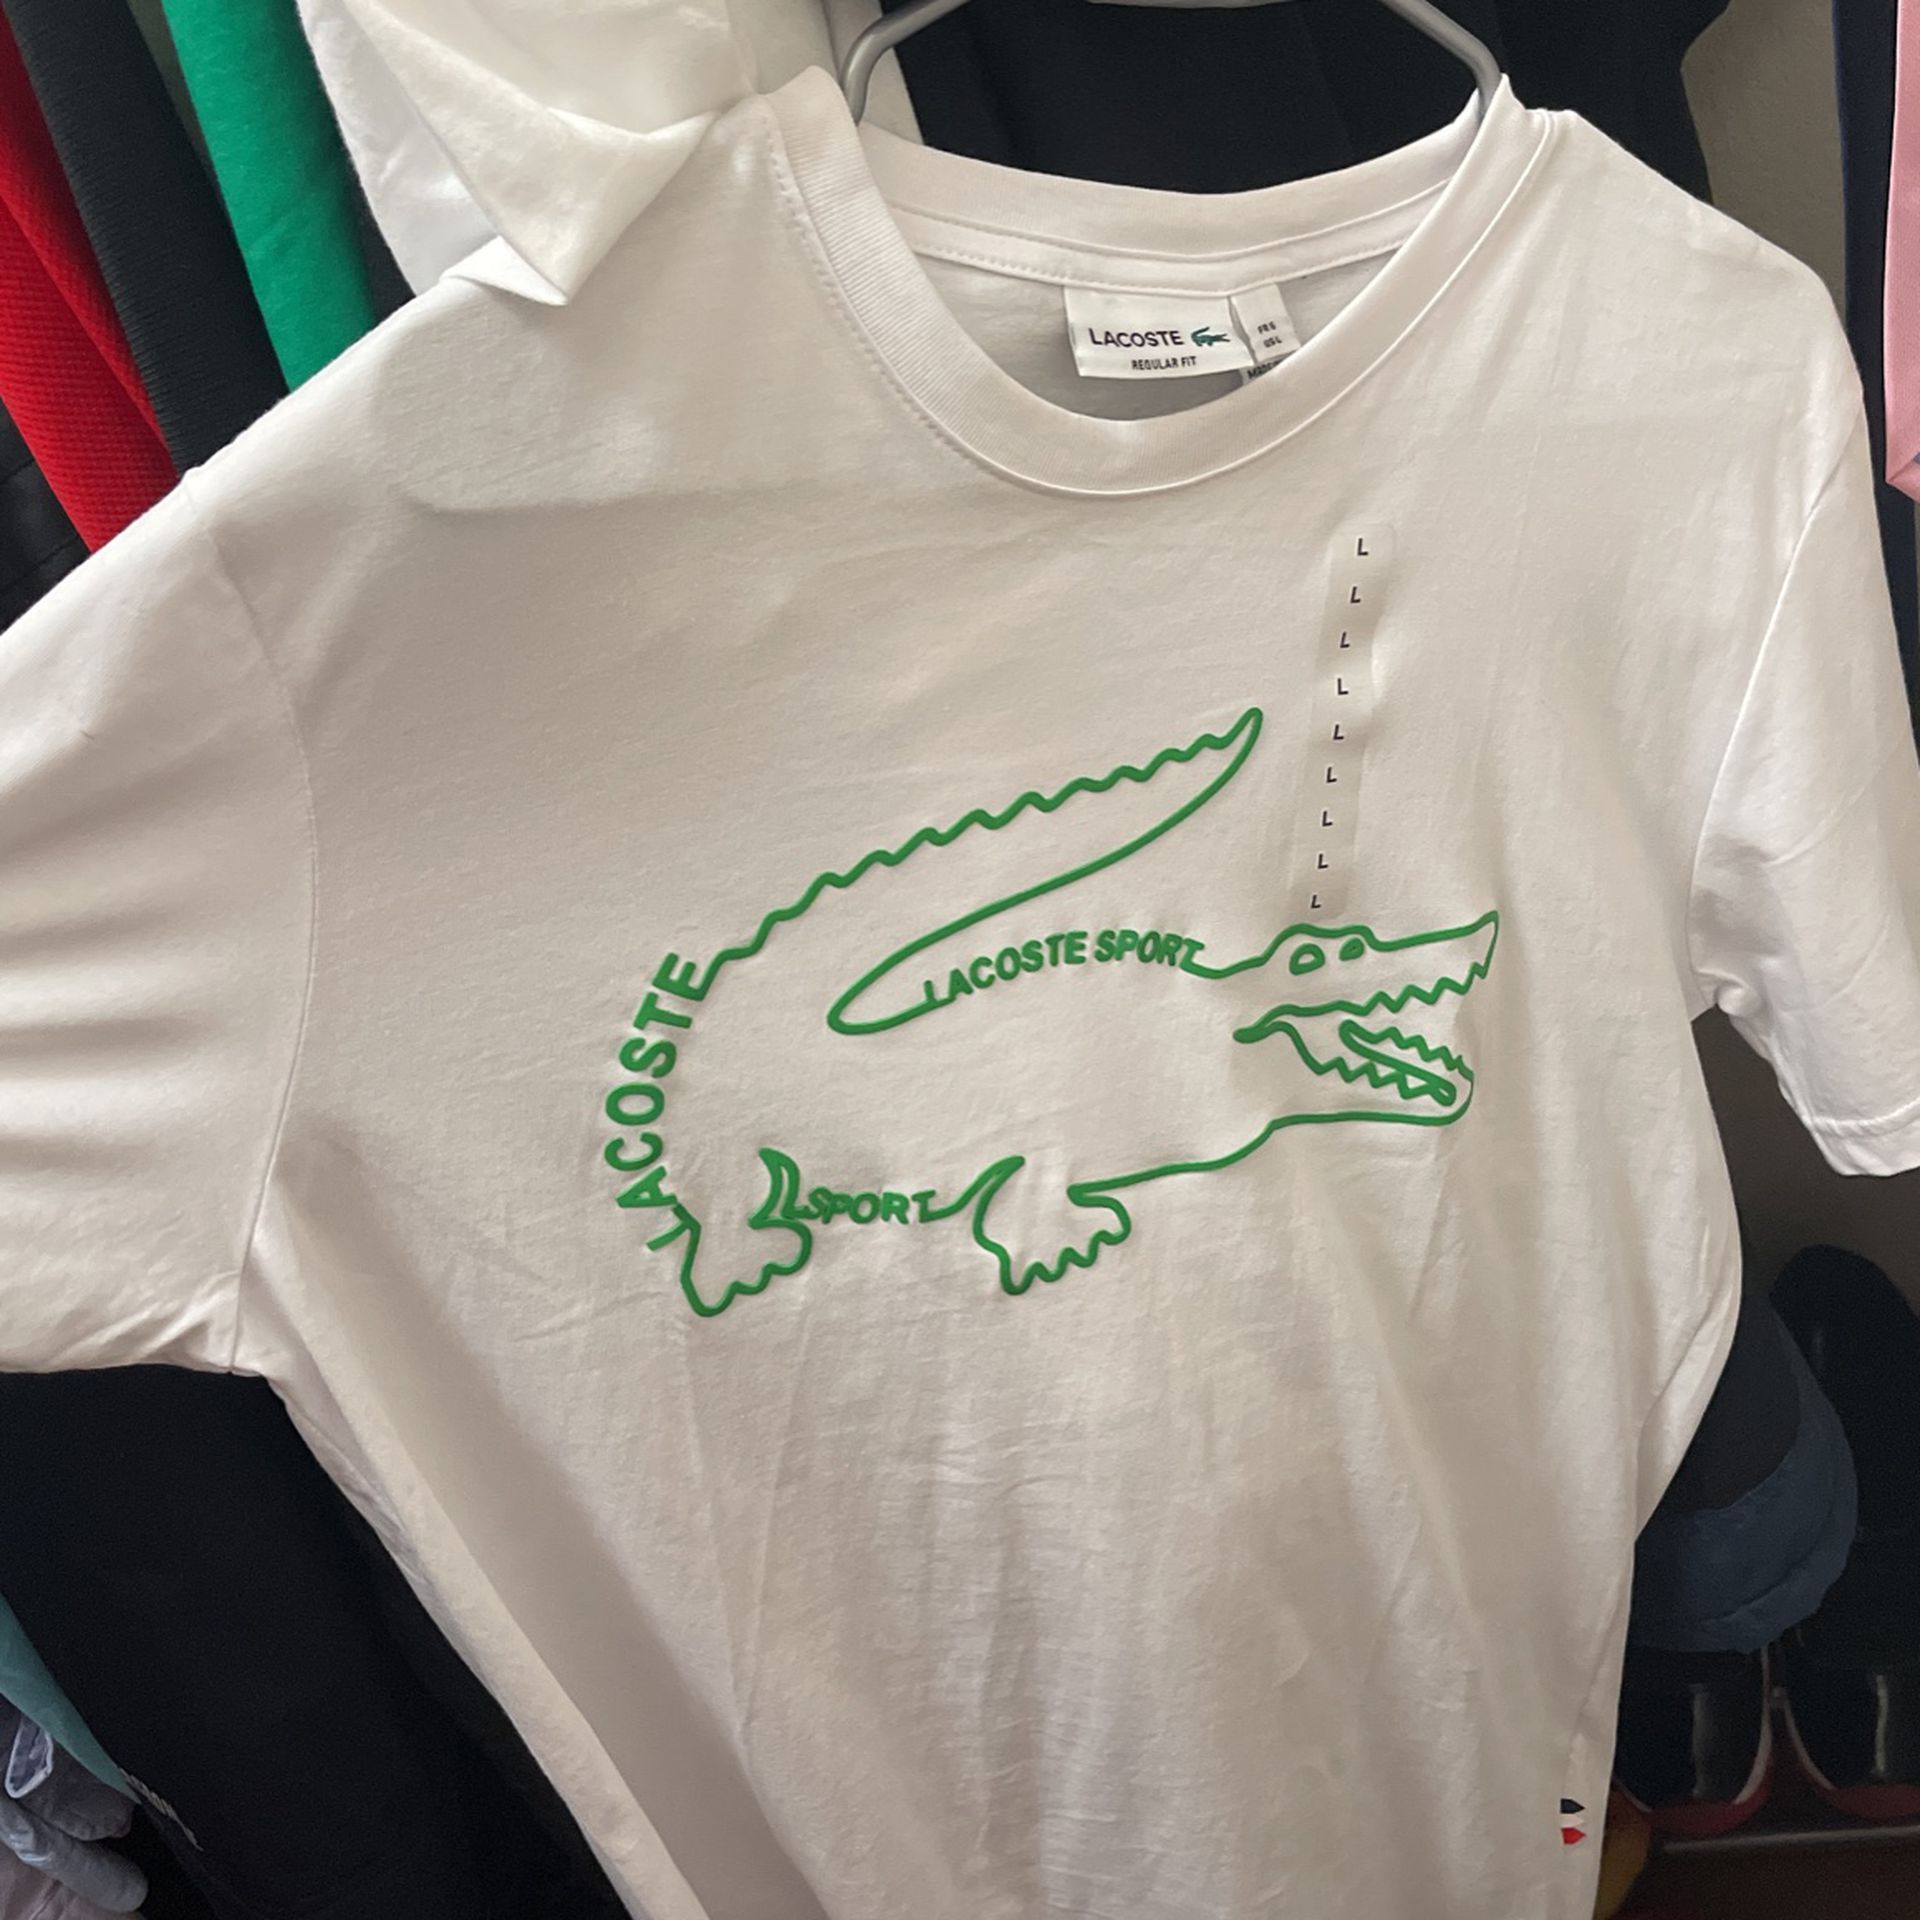 Lacoste shirts 